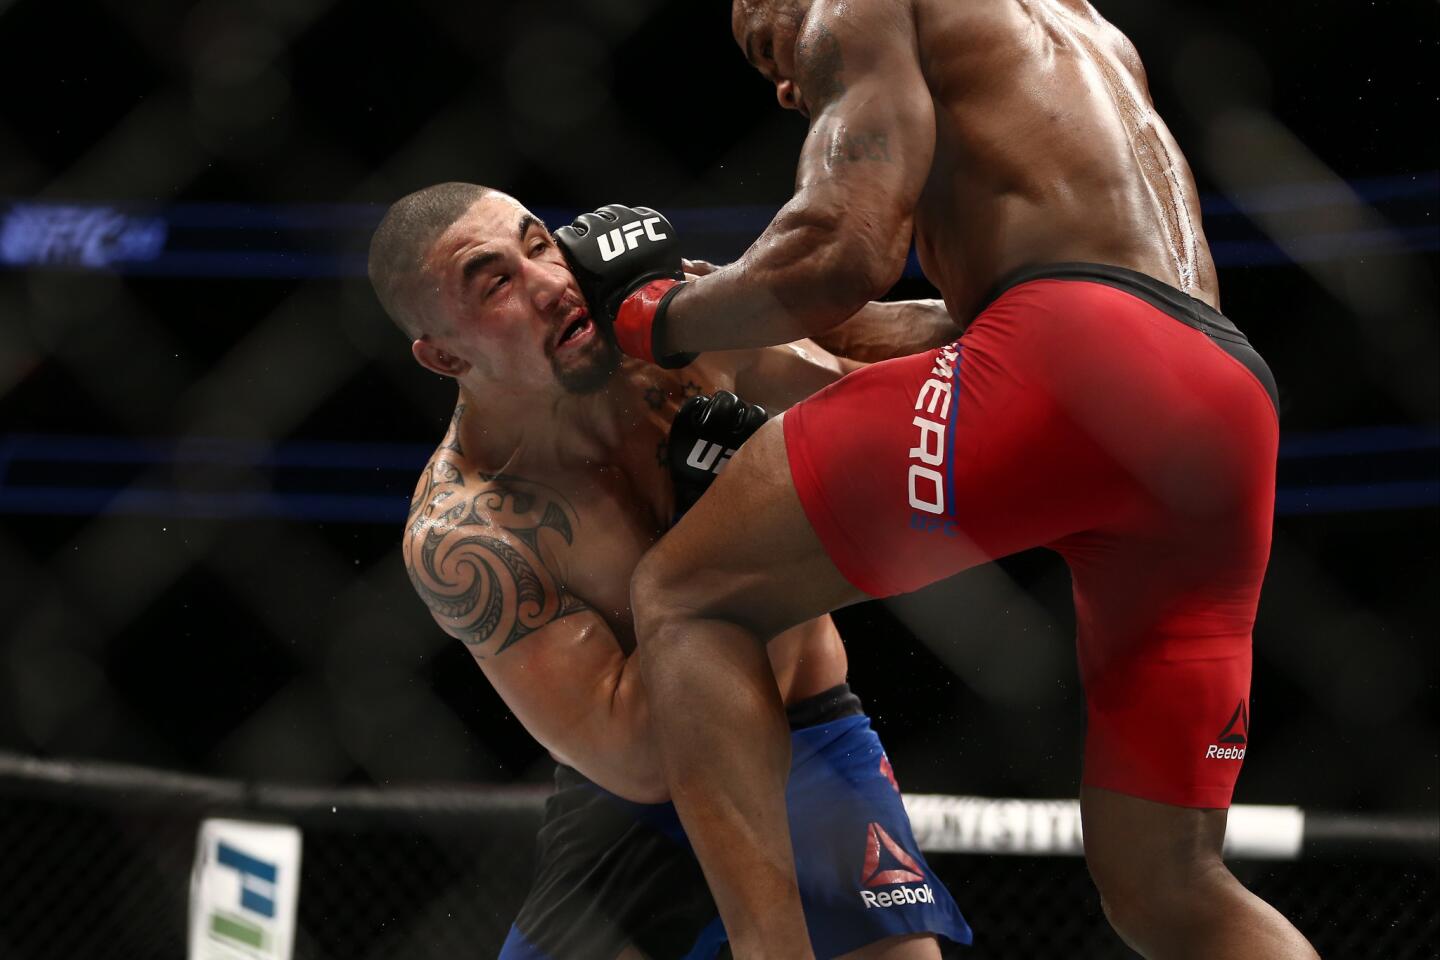 Yoel Romero knees Robert Whittaker in their interim UFC middleweight championship bout during the UFC 213 event at T-Mobile Arena on Saturday in Las Vegas.